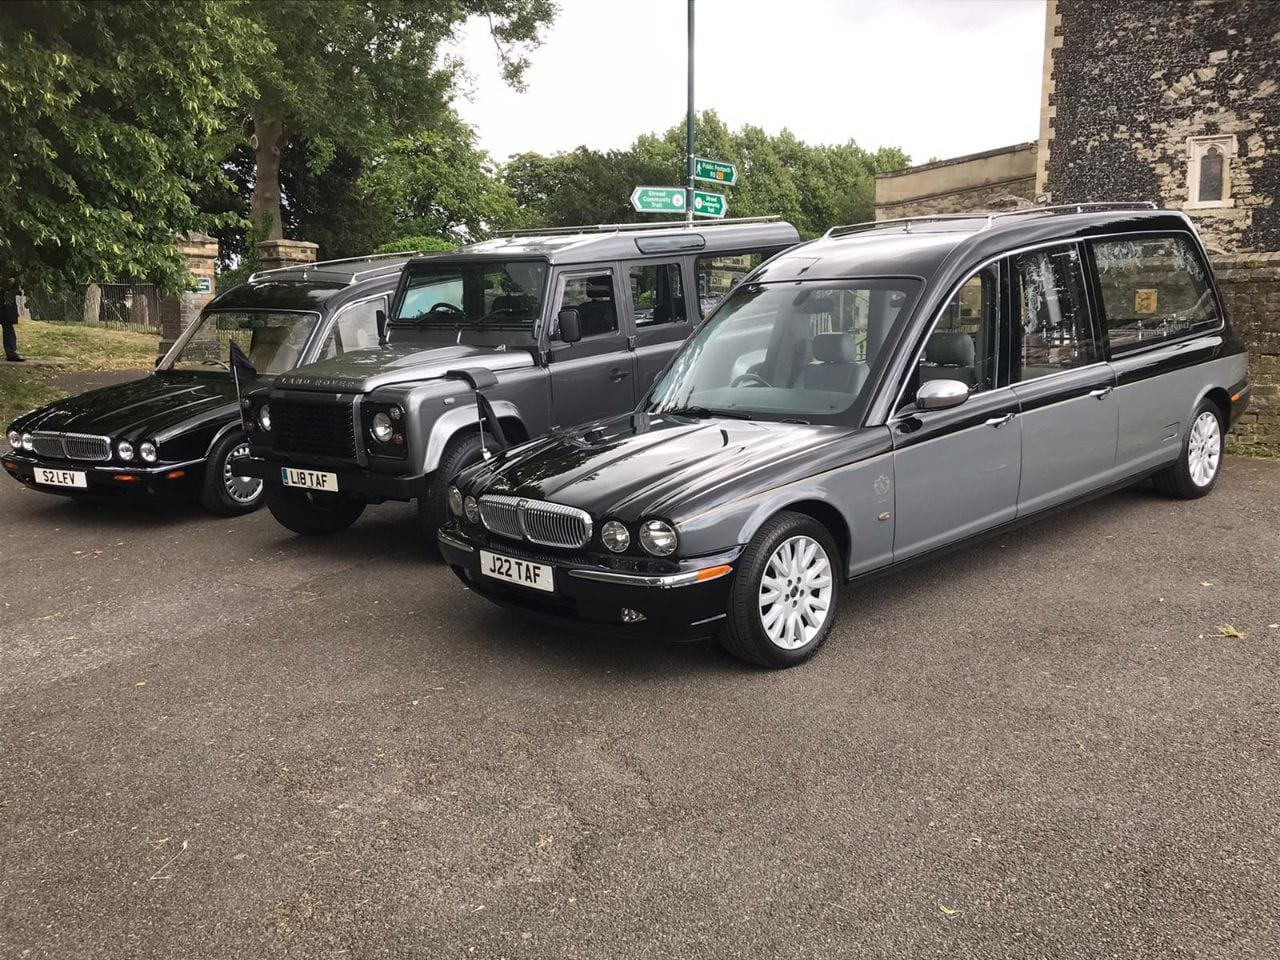 A trio of Terry Allen cars with a Classic Land Rover parked in the middle outside a church